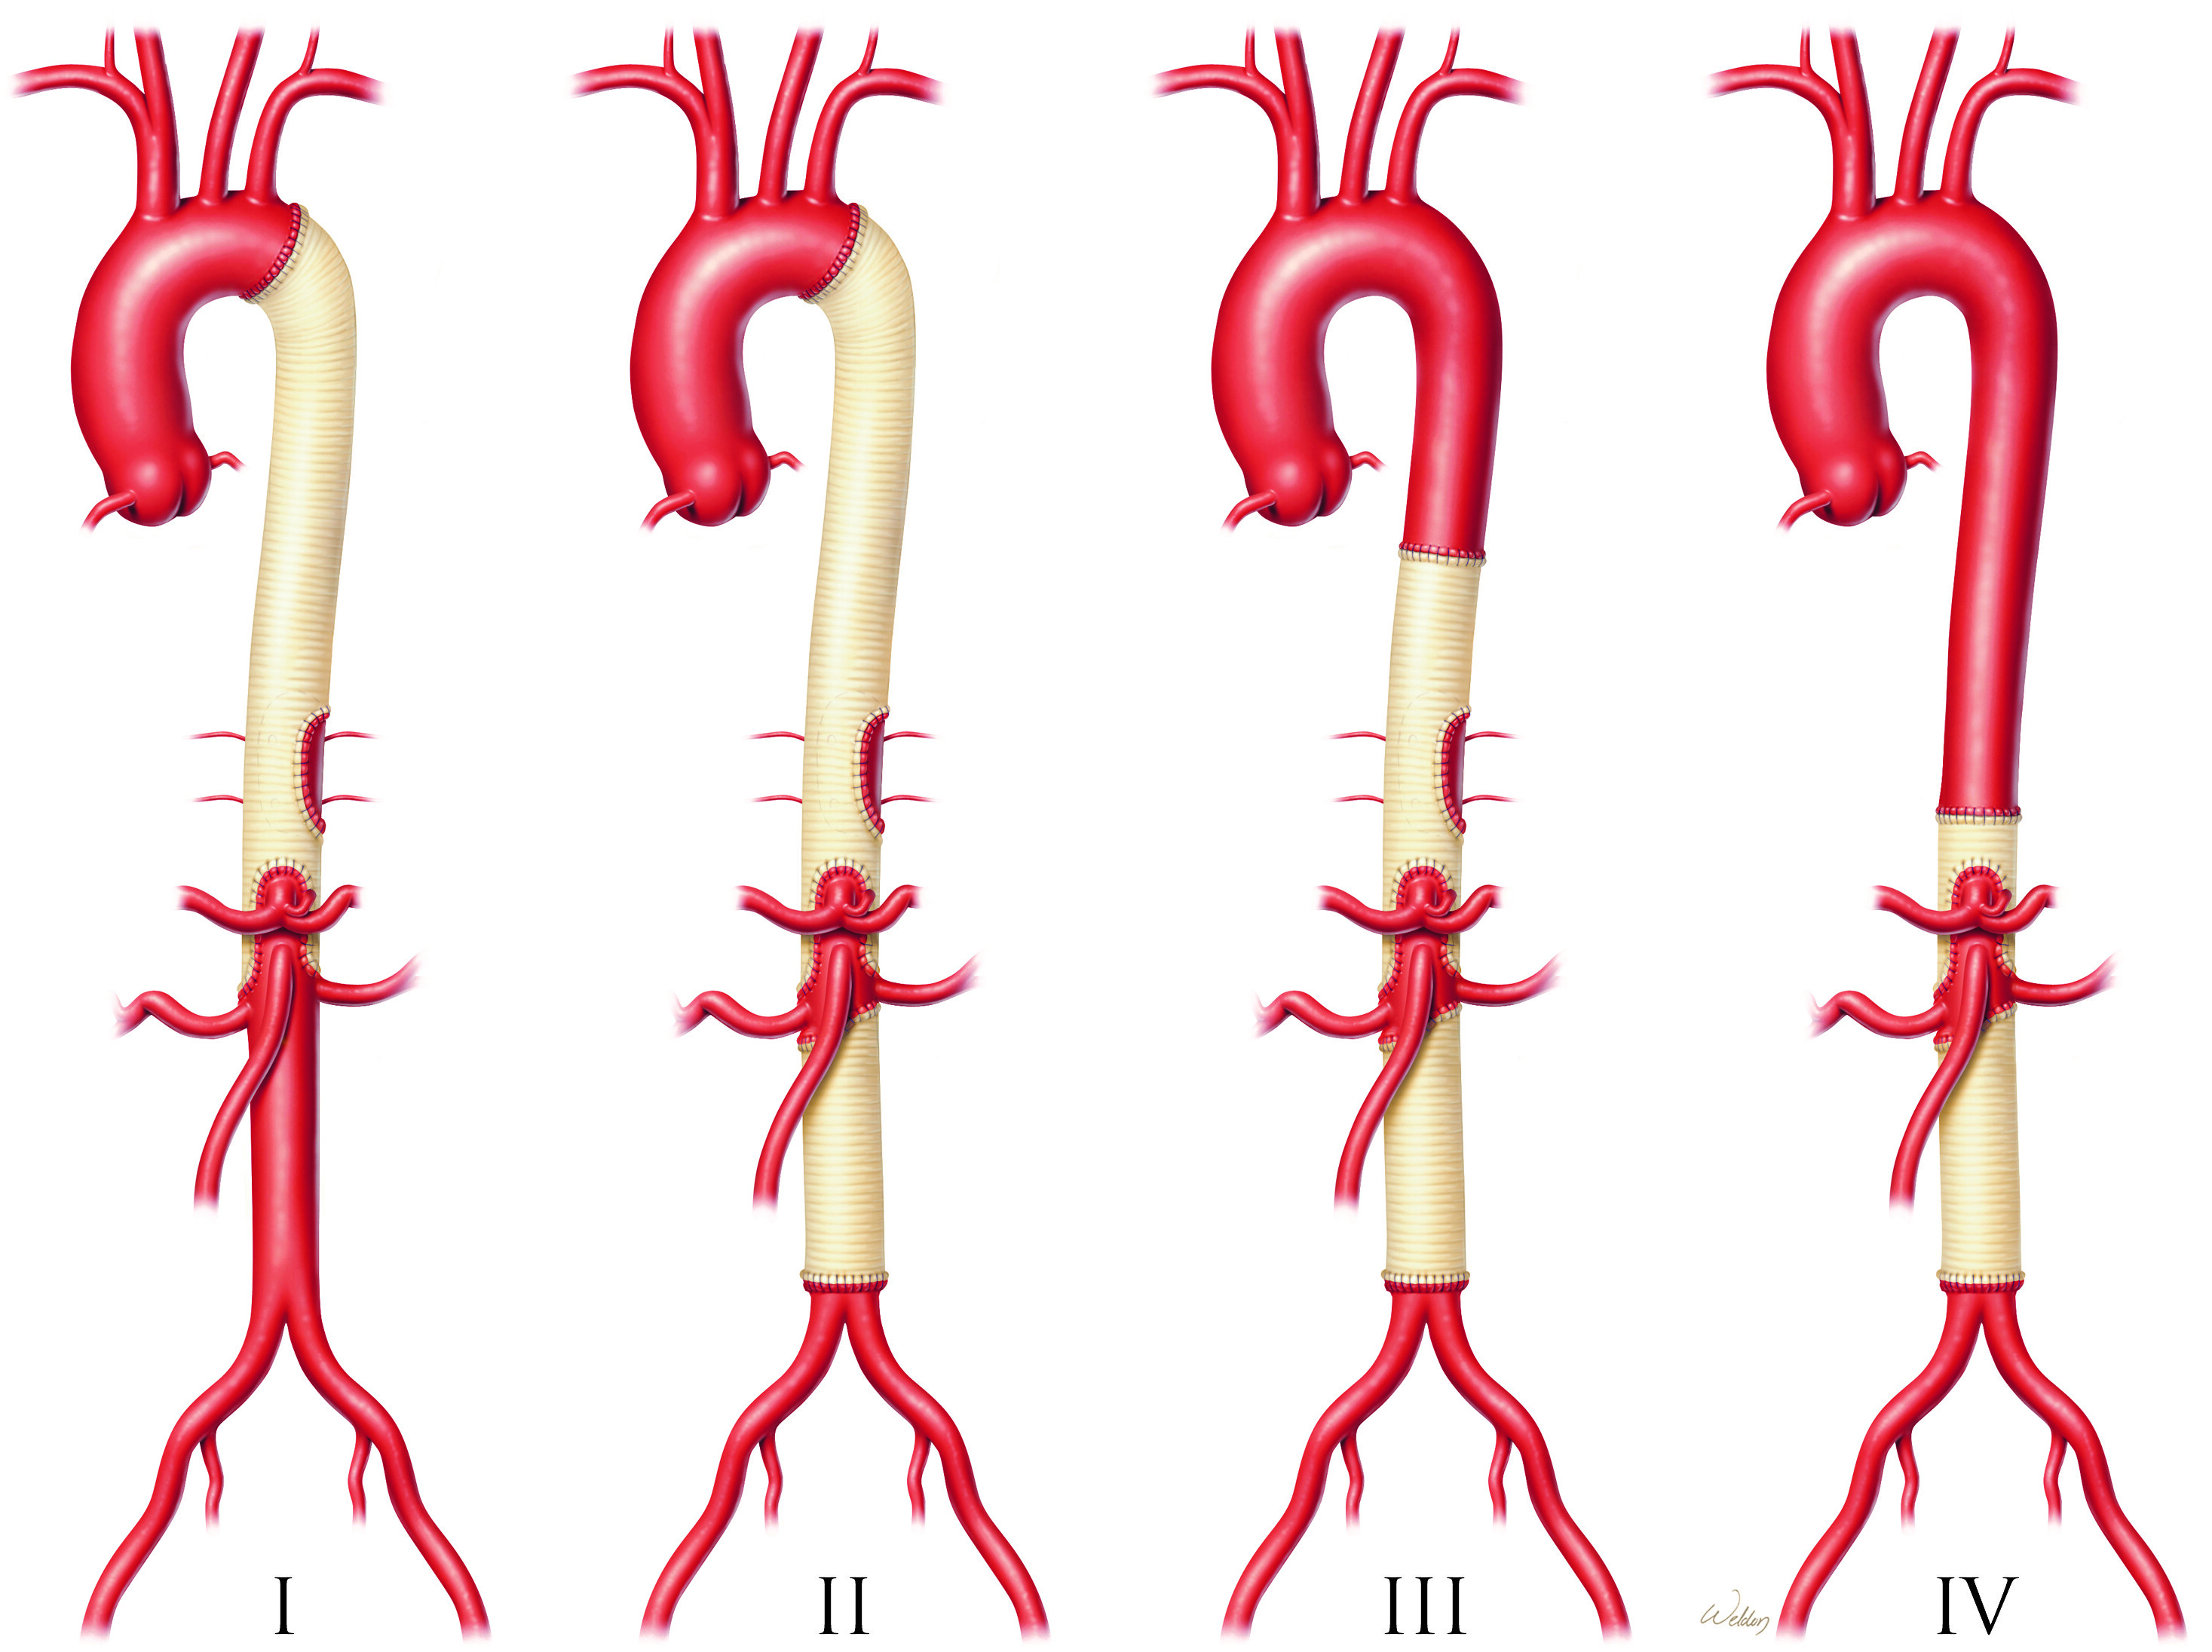 Optimal perioperative care for thoracoabdominal and descending thoracic aortic aneurysm repair: a review